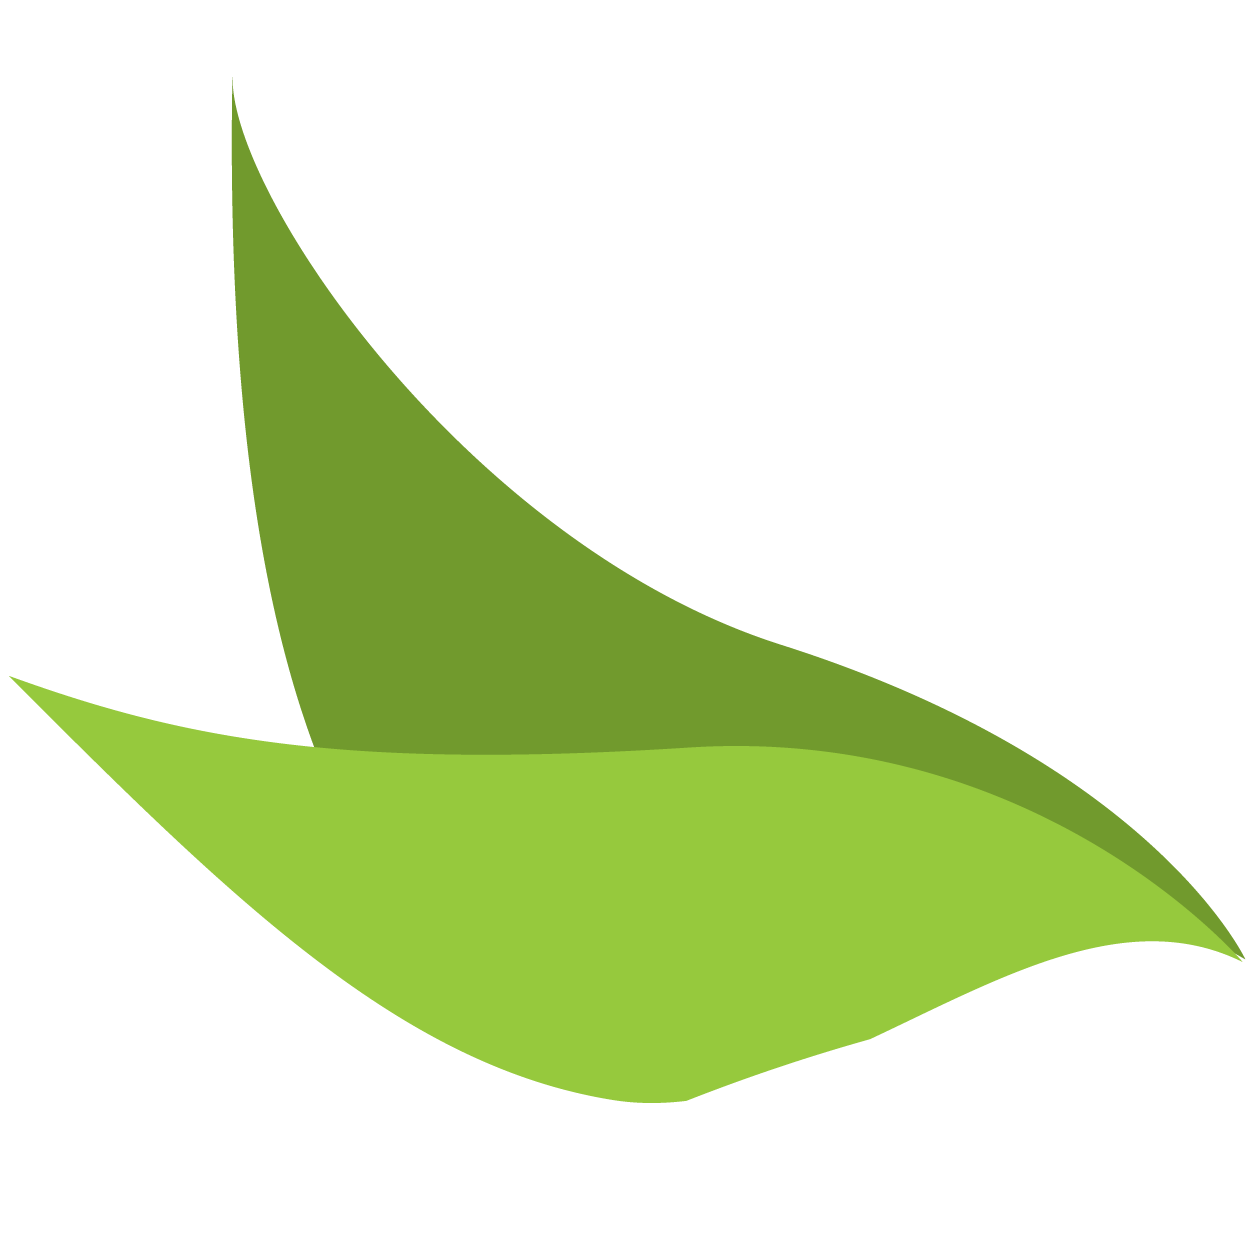 graphic icon of two overlapping green leaves